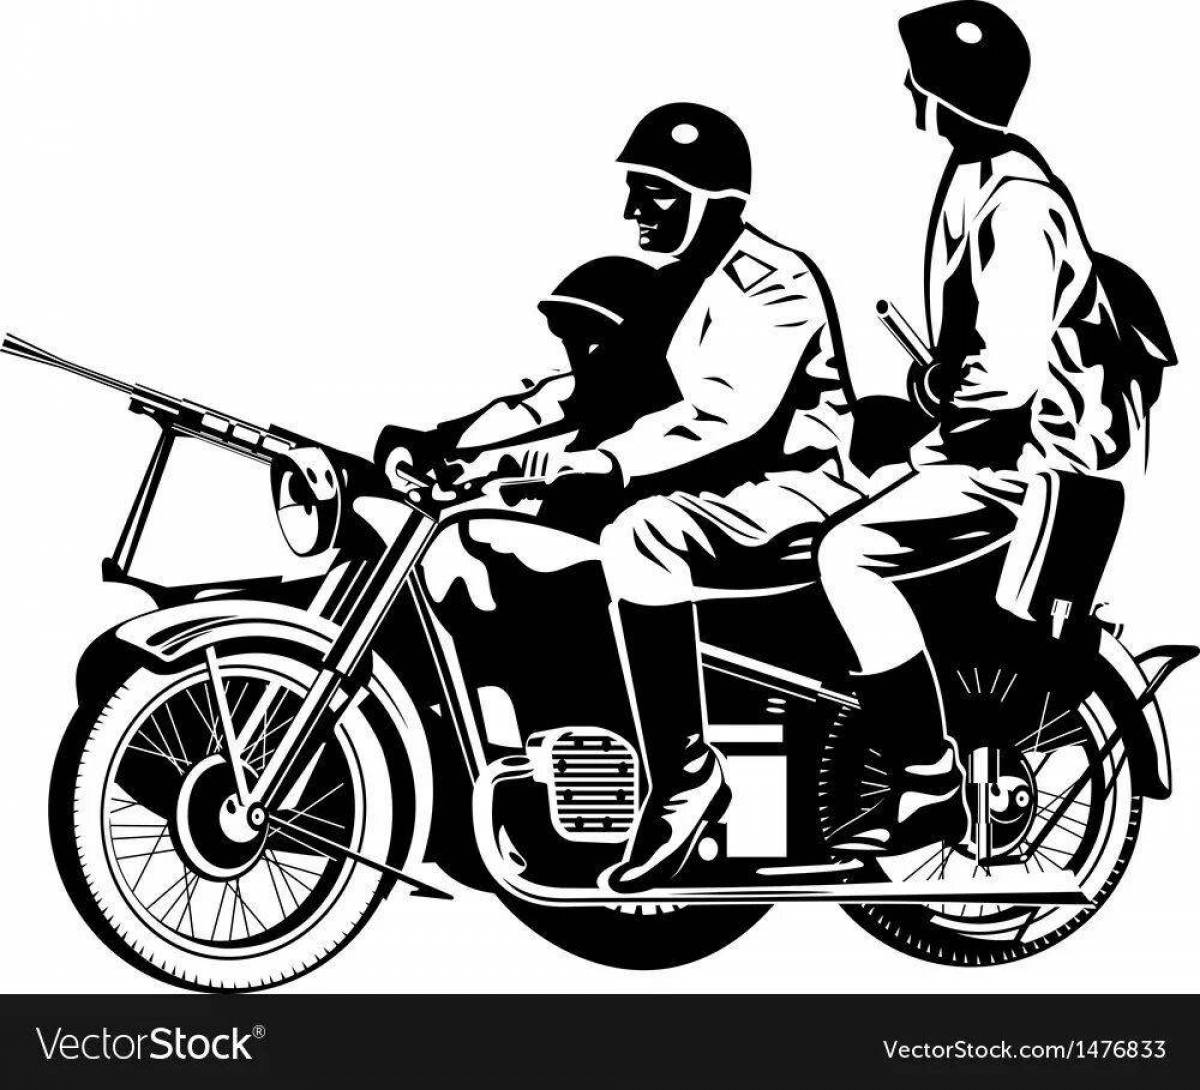 Great military motorcycle coloring book